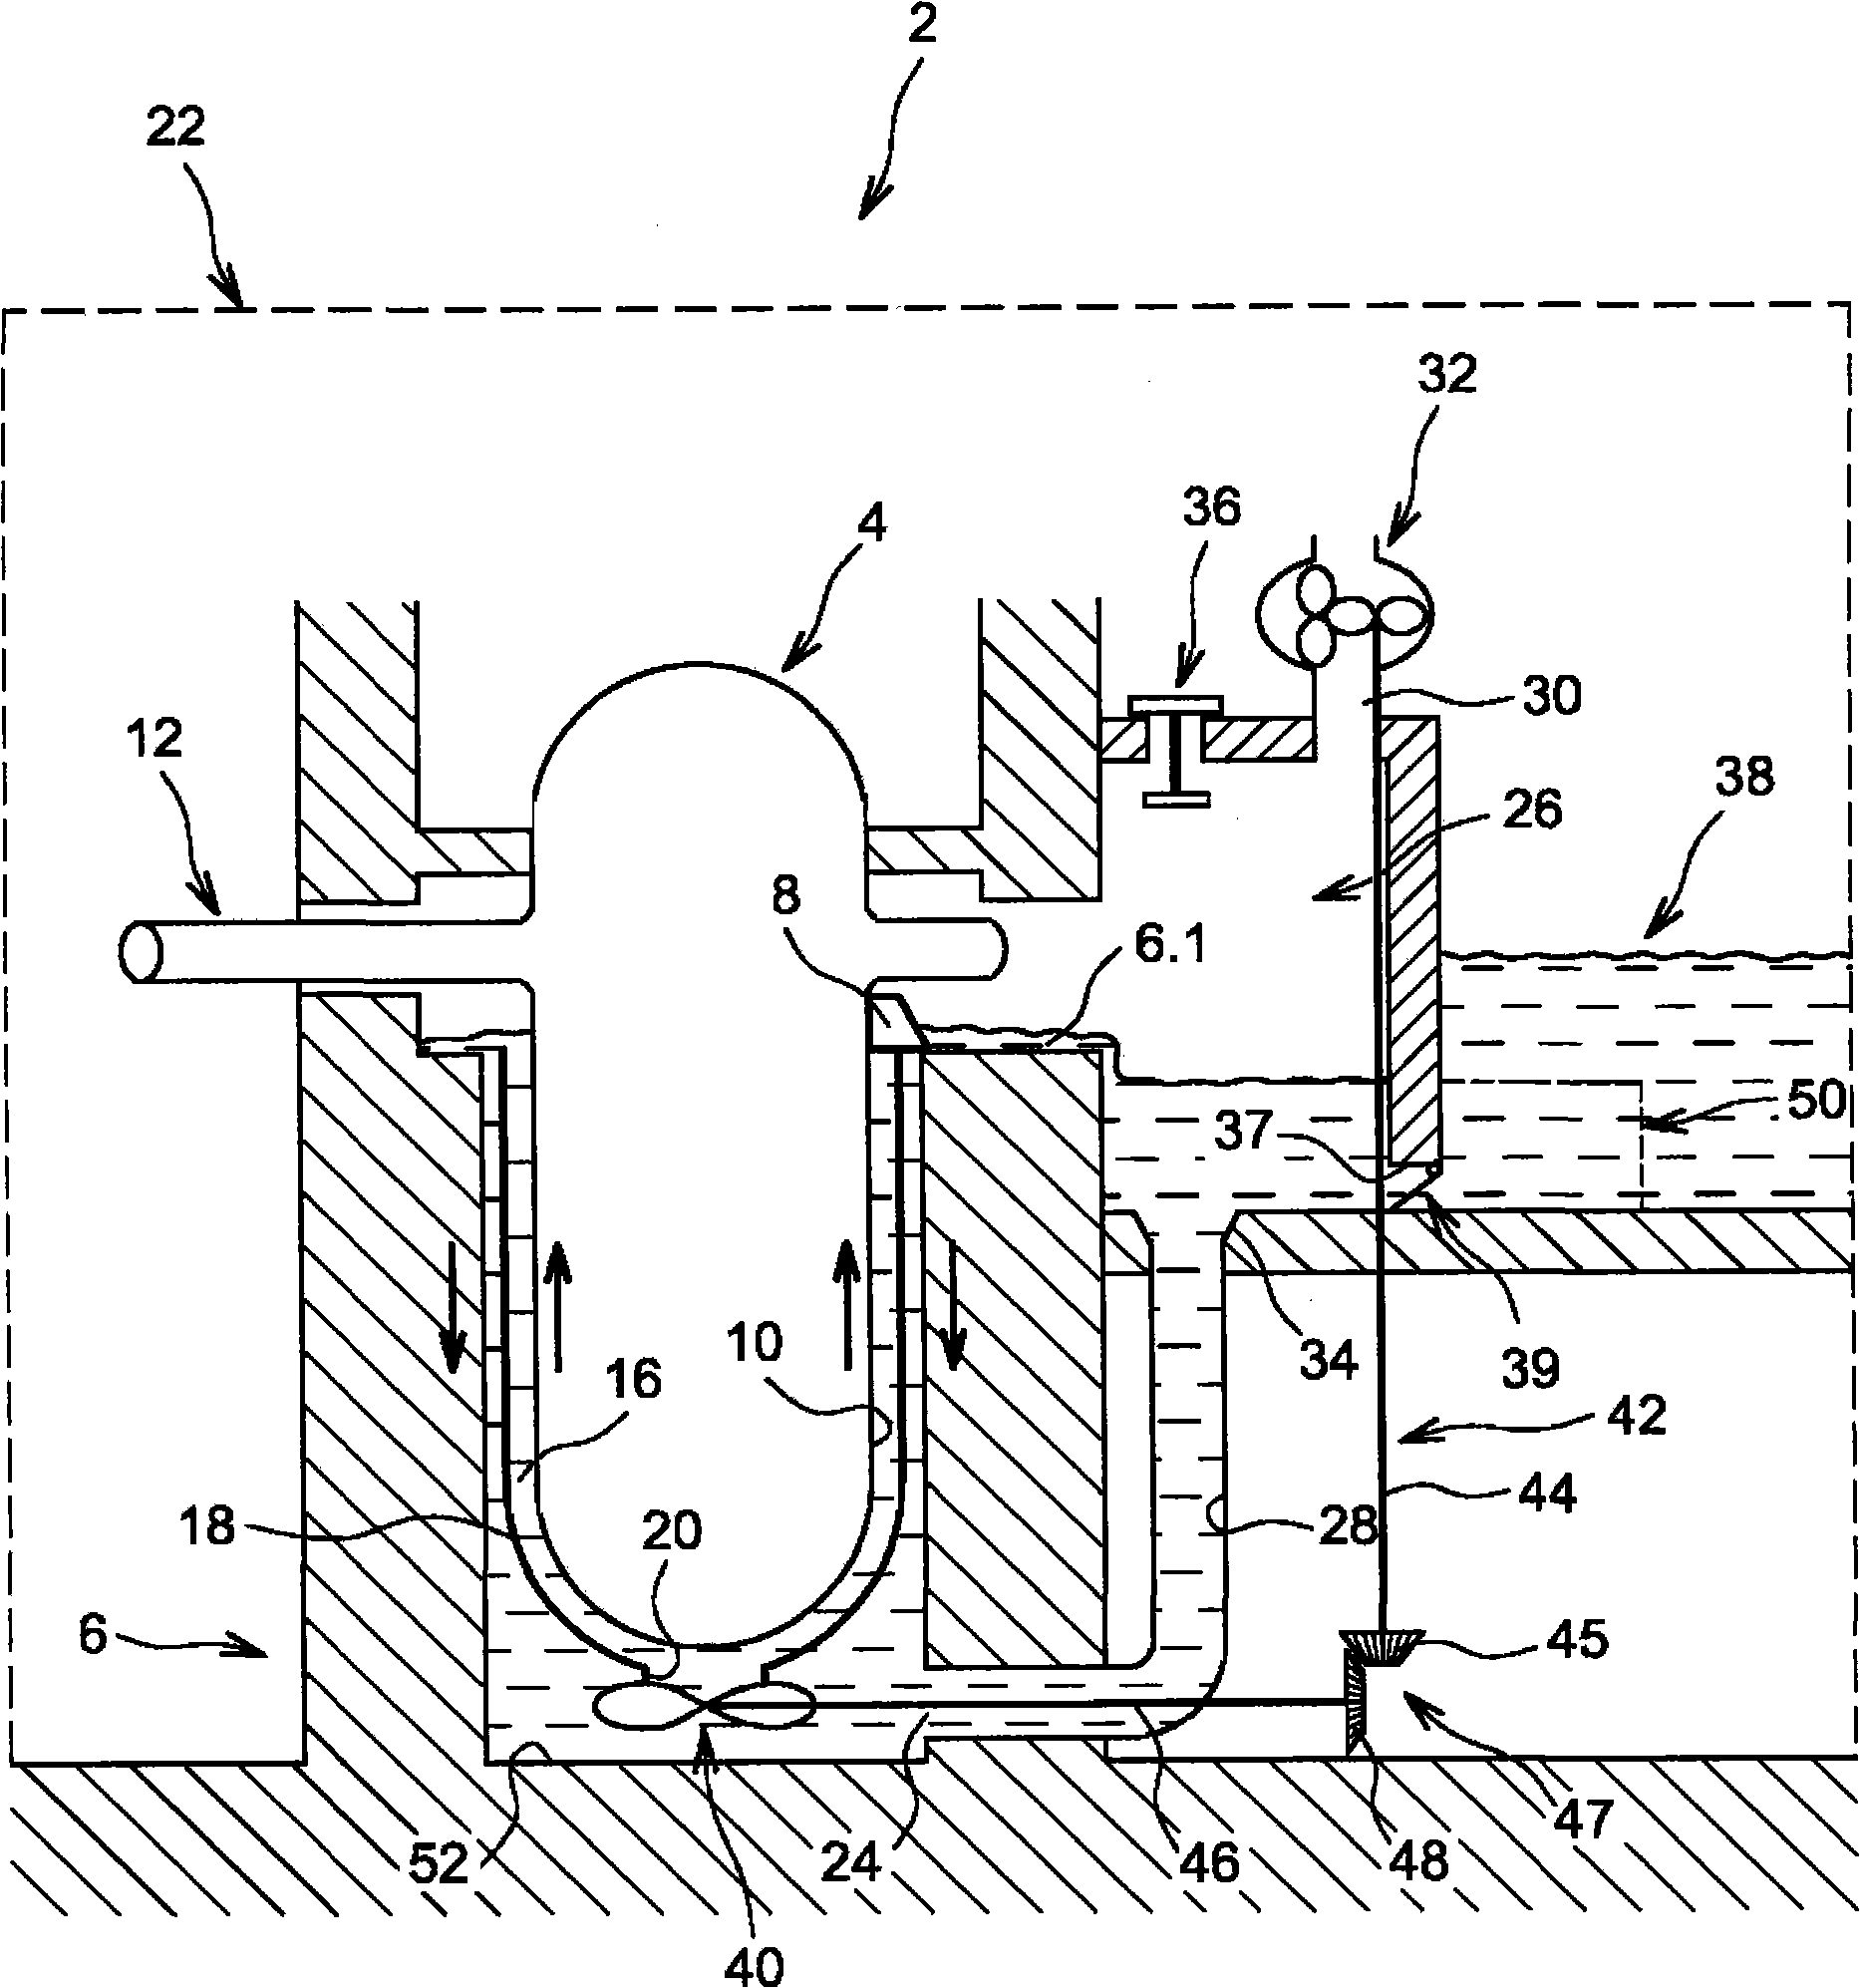 Nuclear reactor with improved cooling in an accident situation